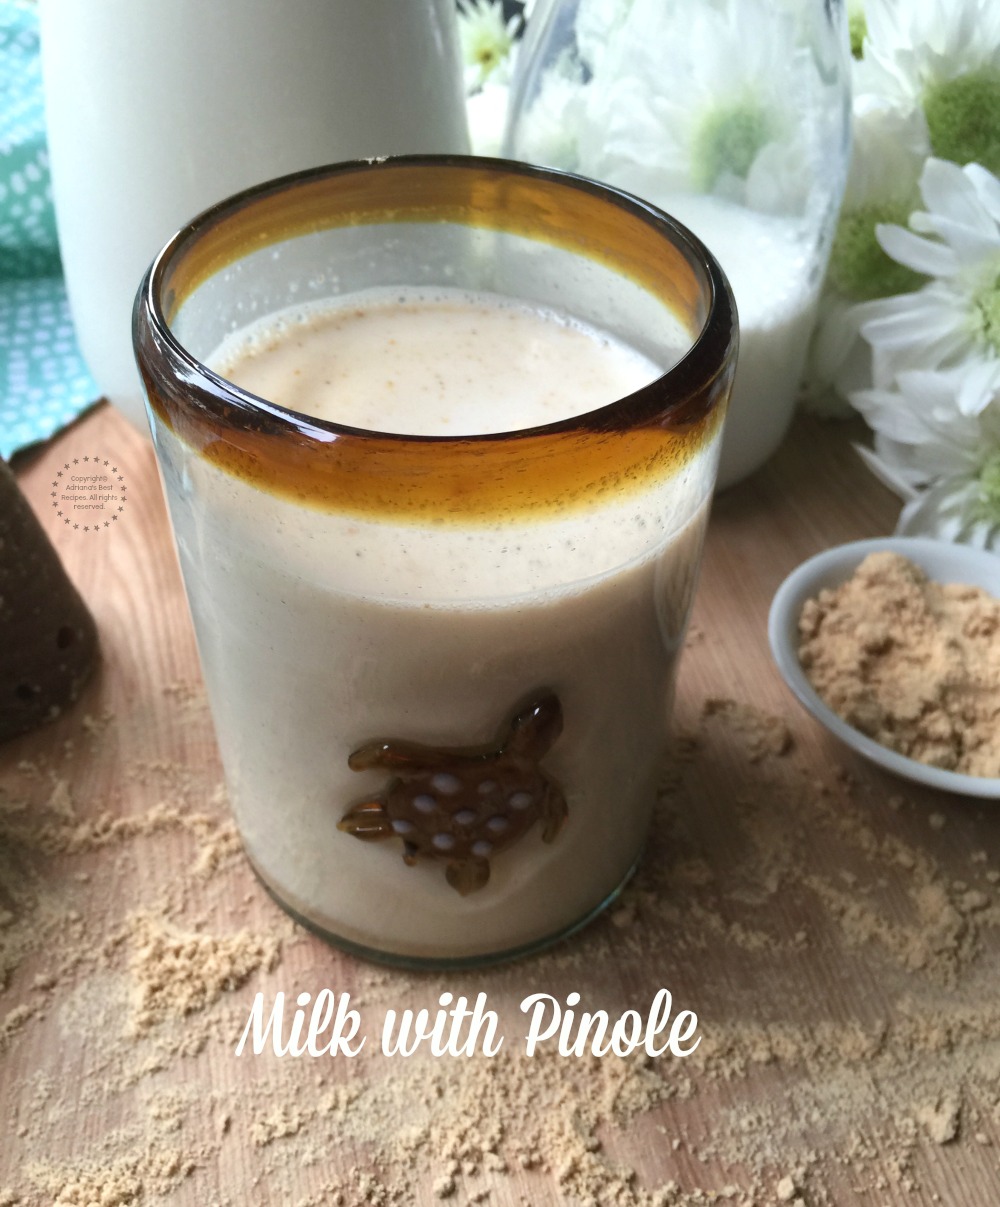 Milk with pinole or pinolli a special kind of roasted ground maize and sweeten with piloncillo and spices